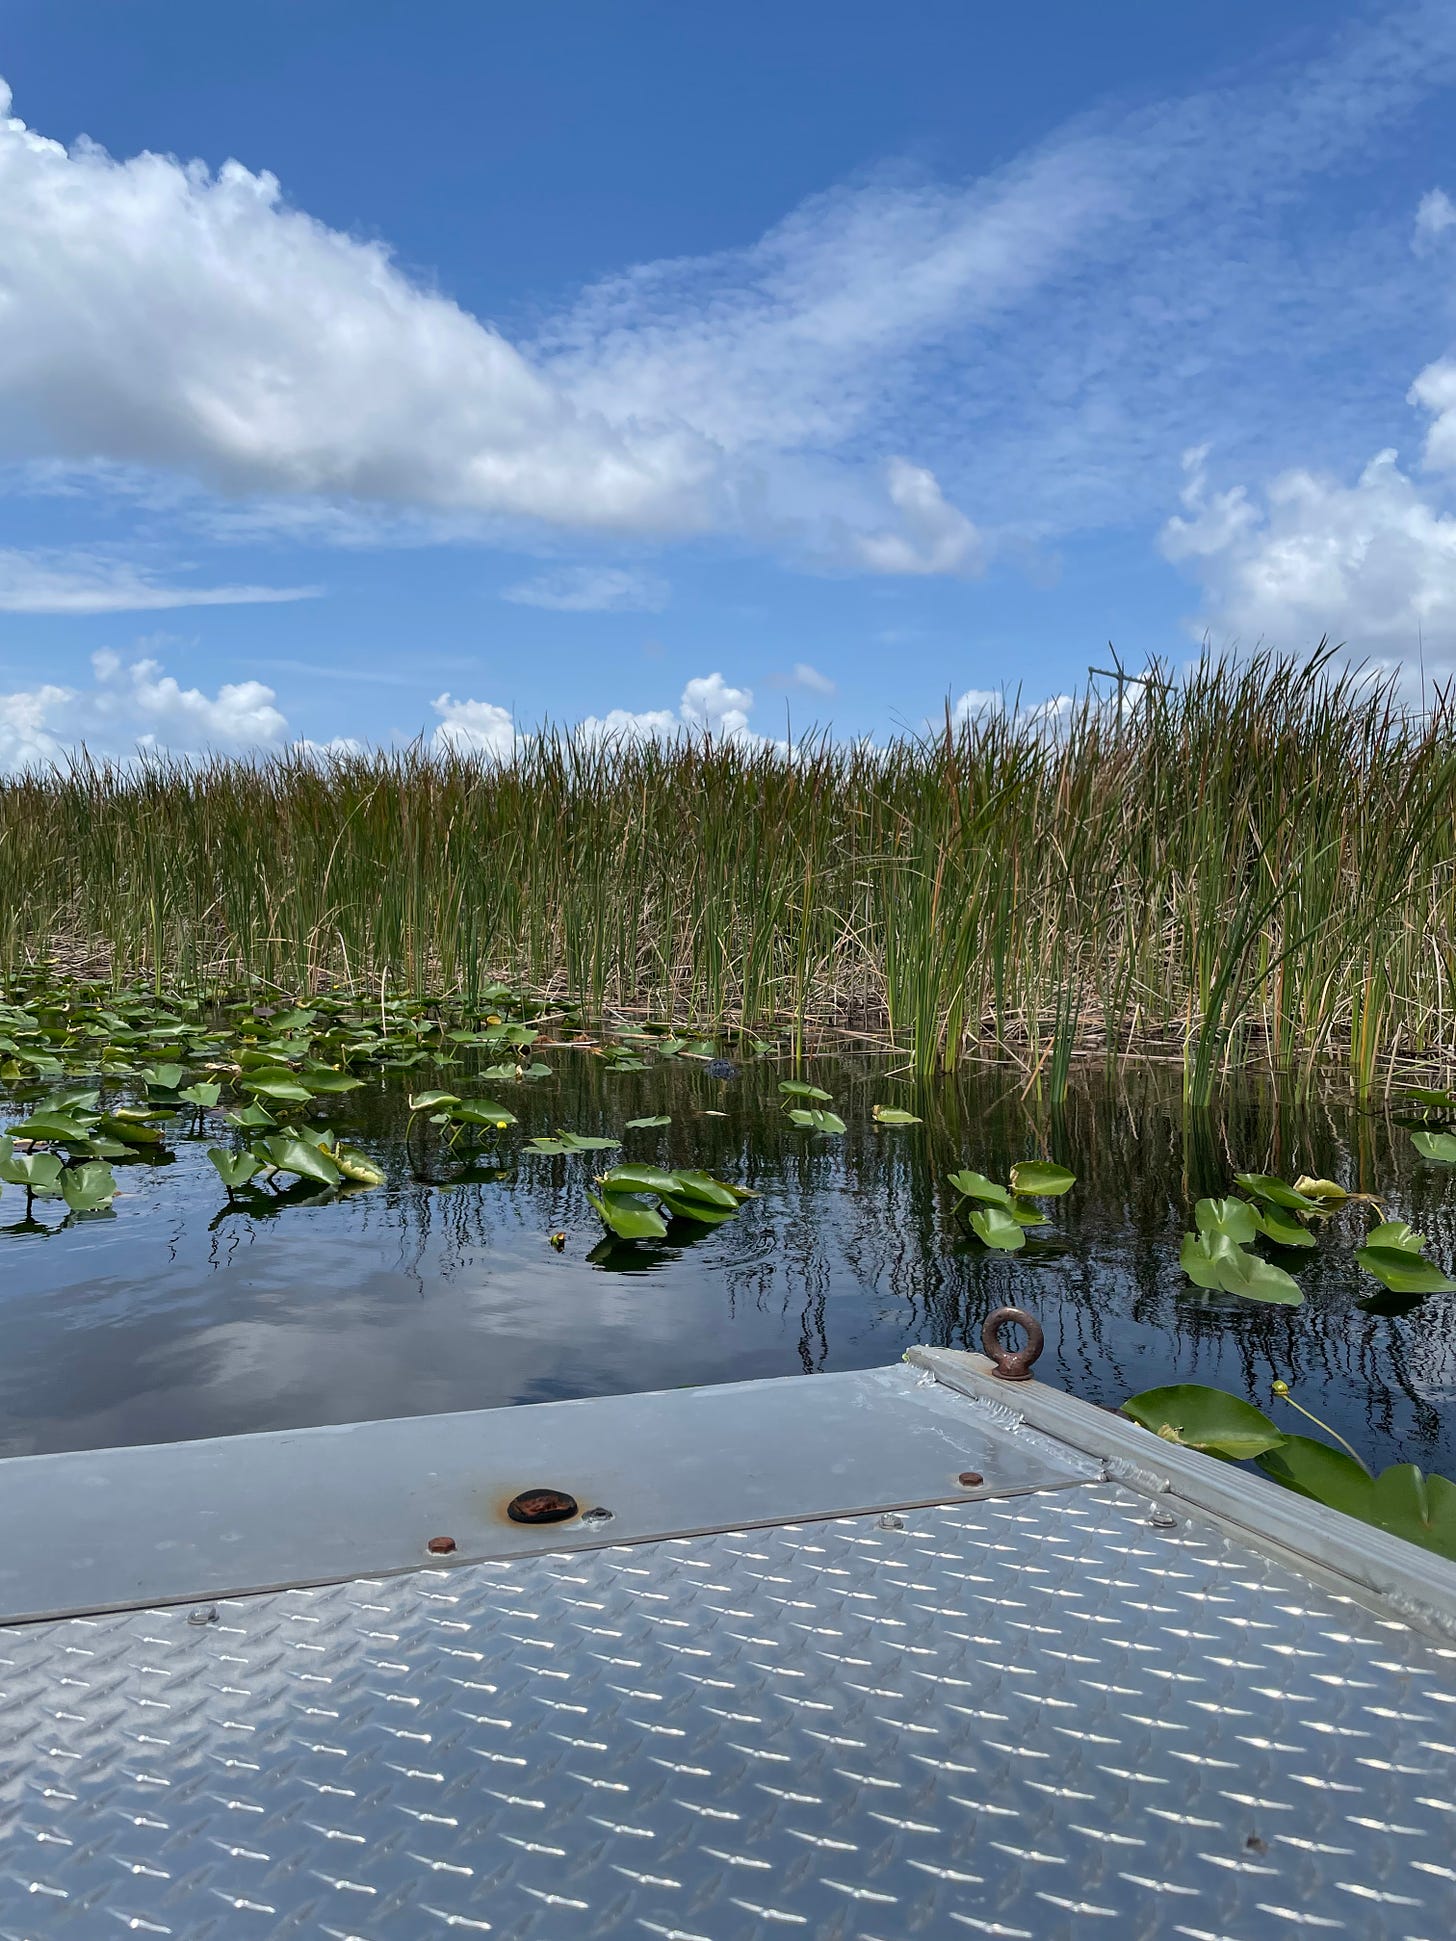 The edge of a metal boat on the Florida Everglades. Clouds can be seen in the blue sky. Rising above the water are marsh grasses.